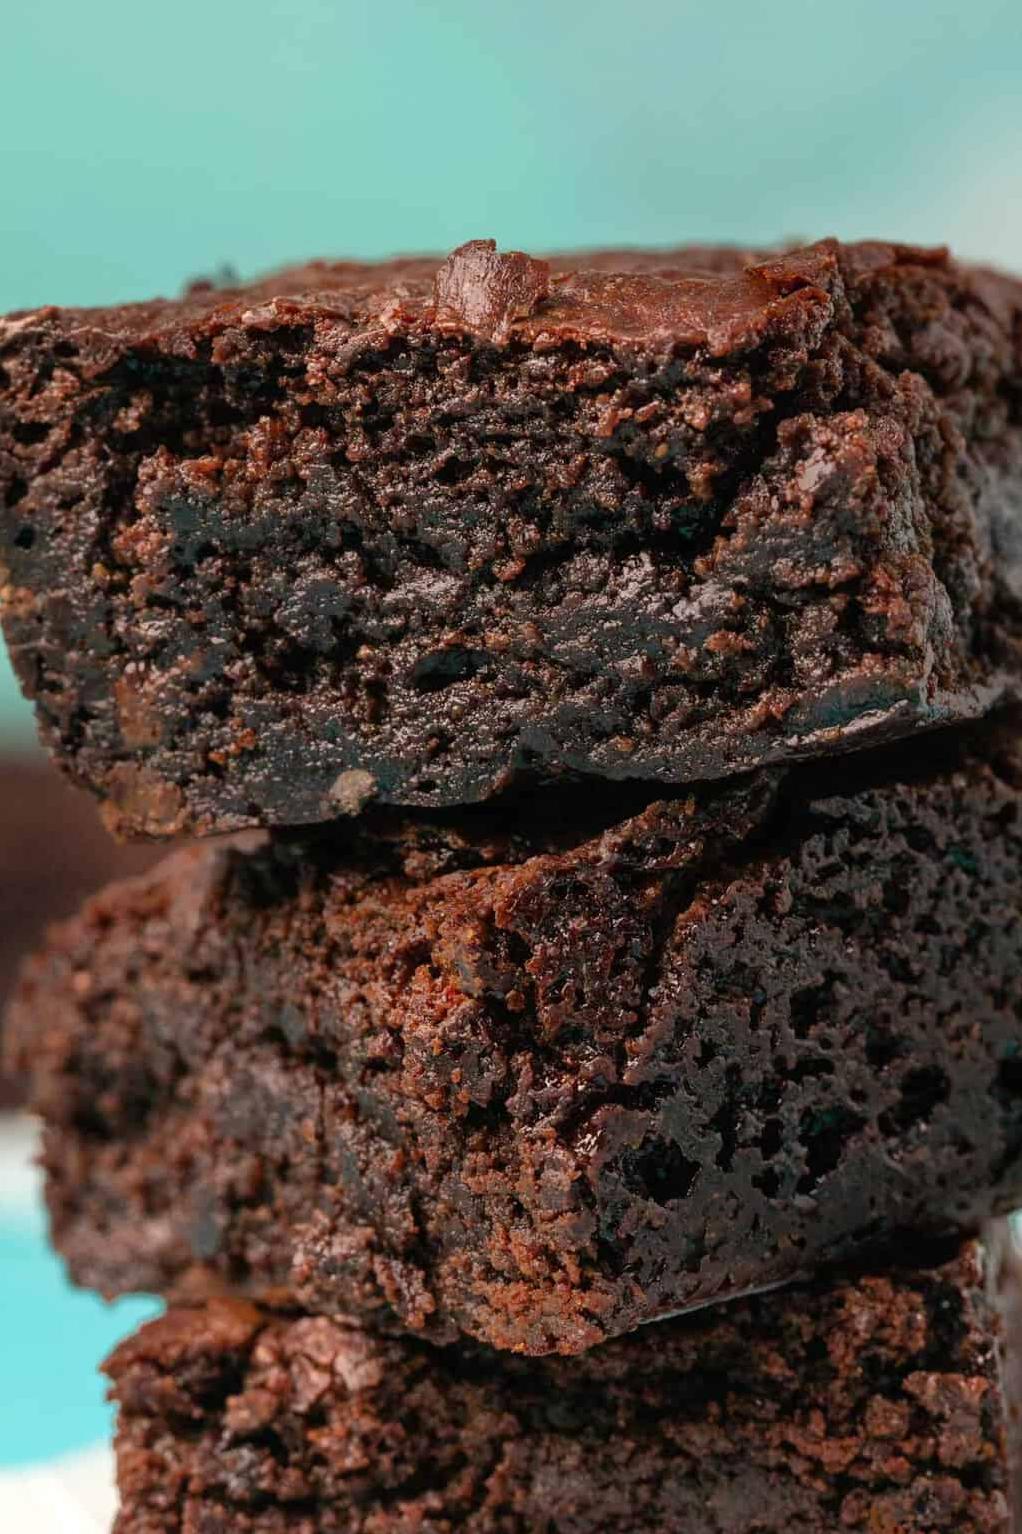  Chocolate lovers, rejoice – these Vegan Gluten Free Brownies are everything you're looking for.